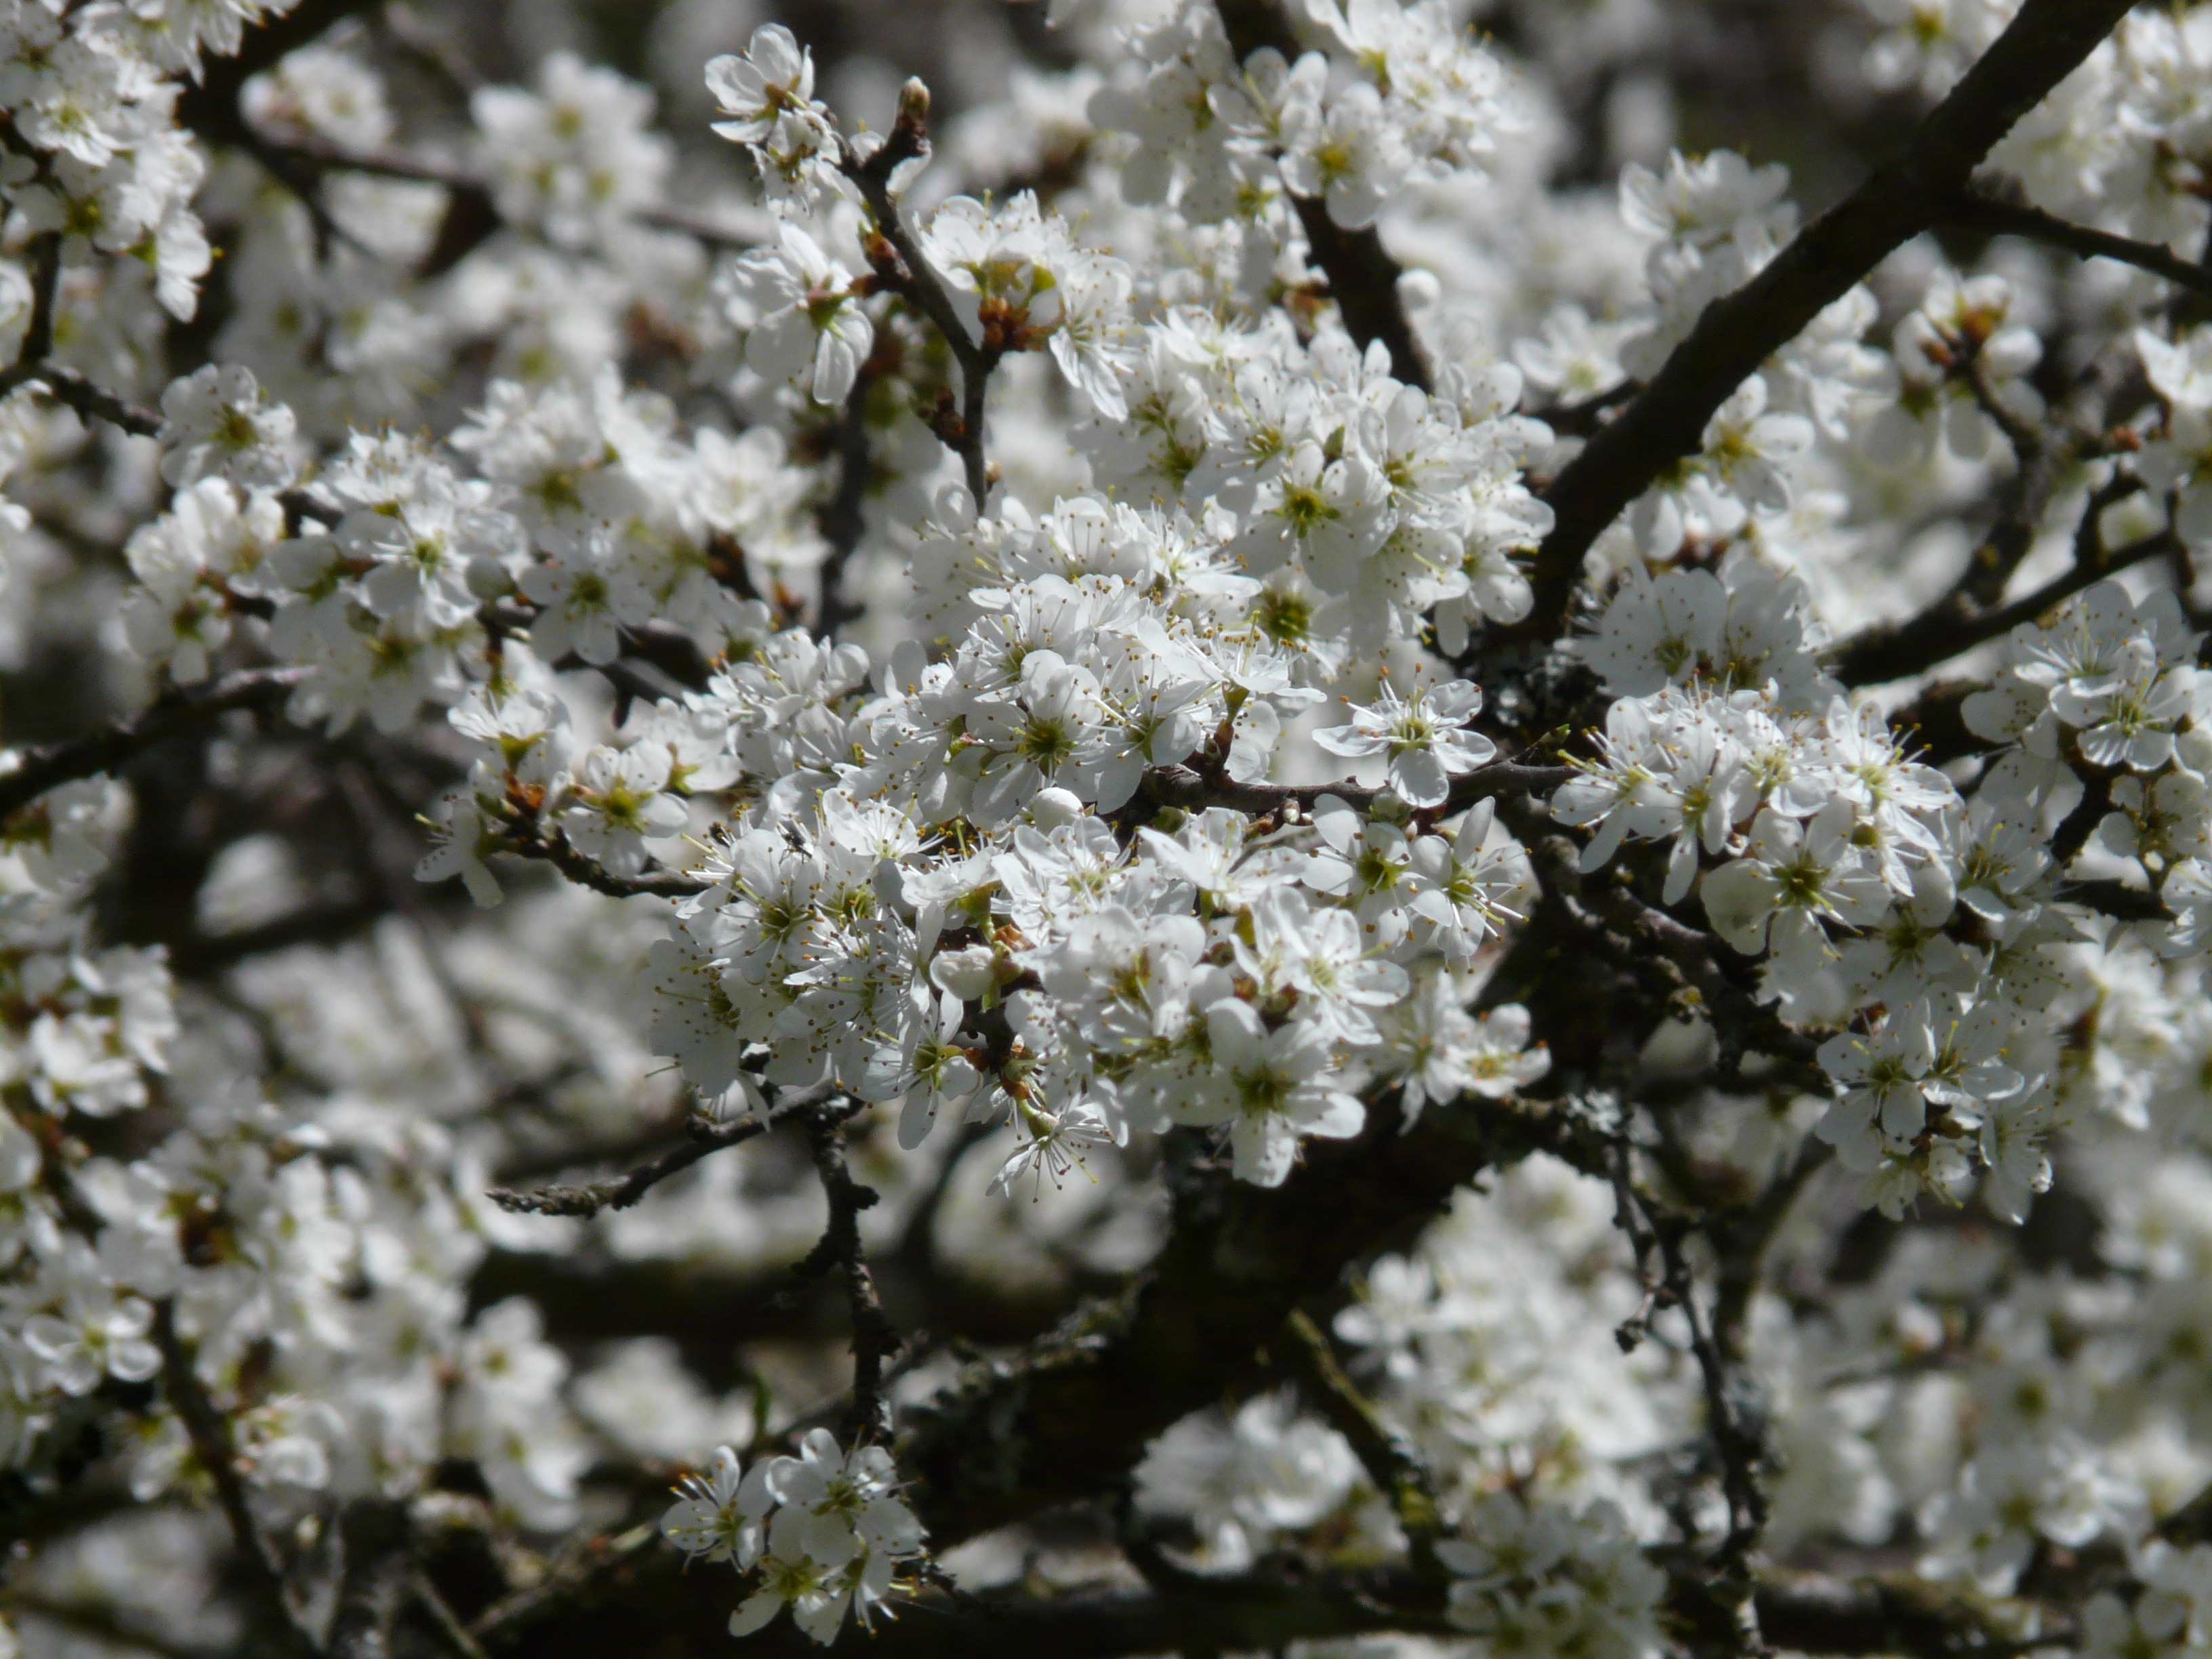 White blackthorn buds, close-up free image download